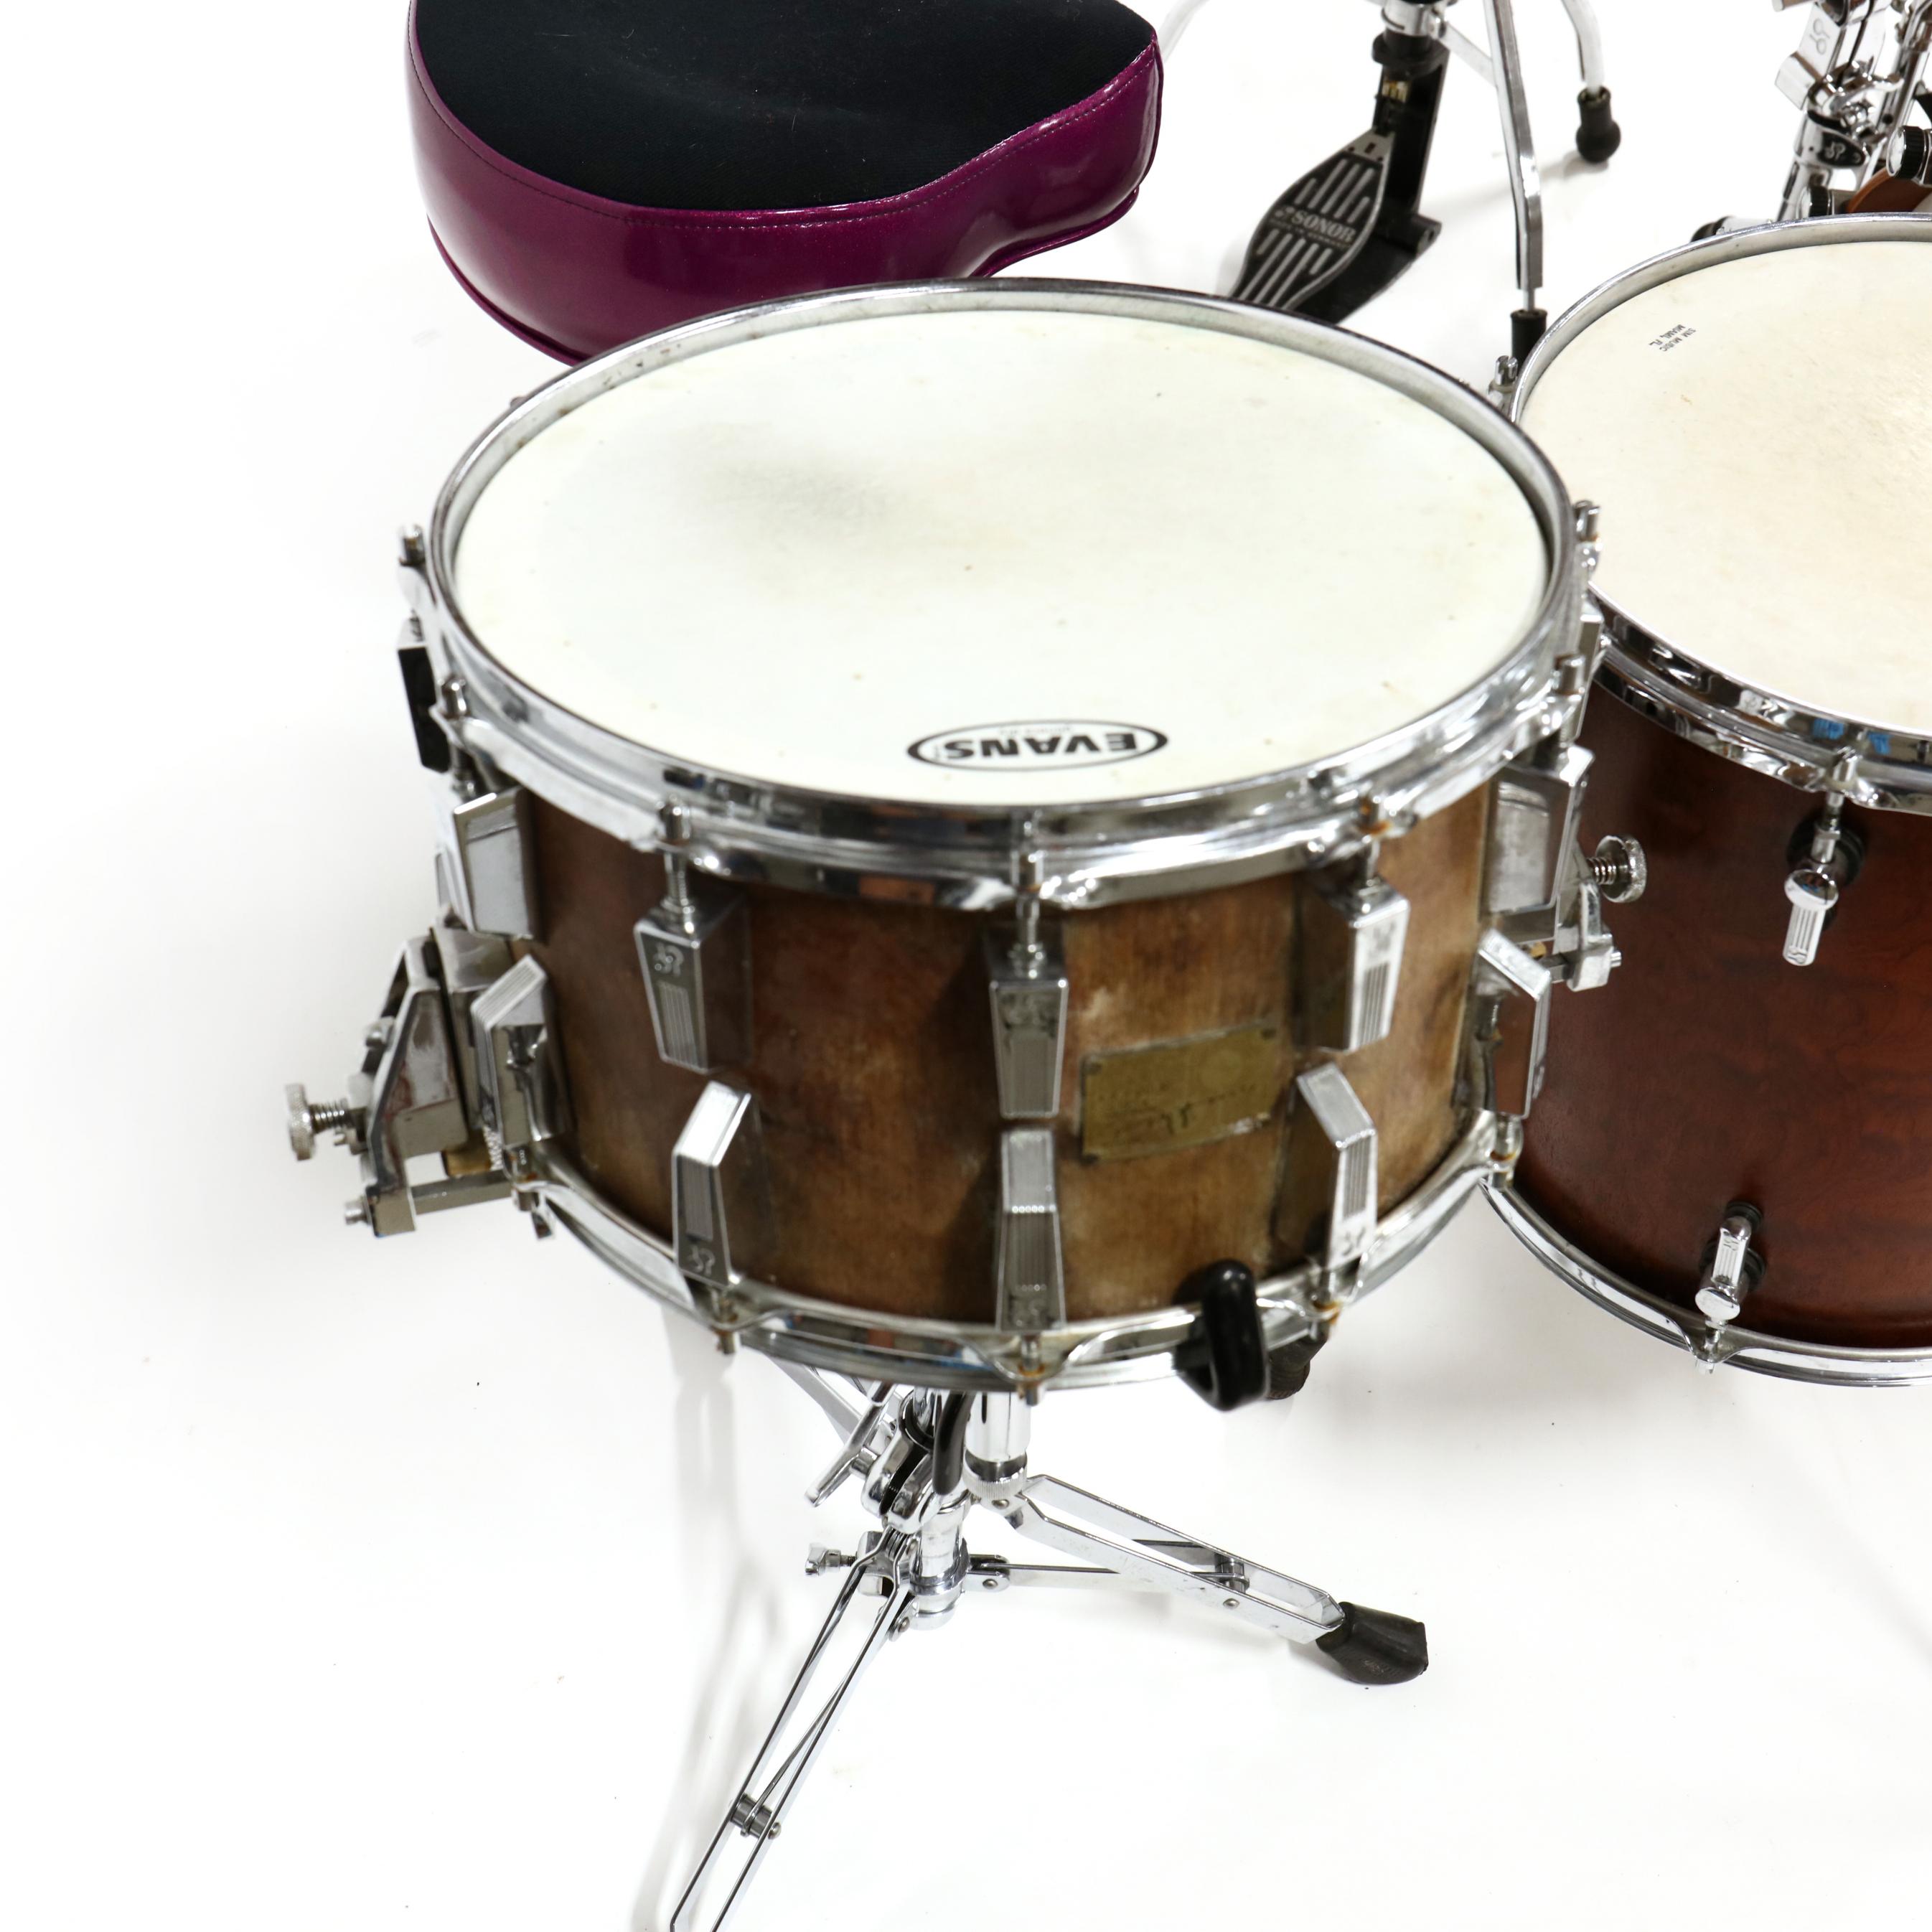 Sonor Drum Set, Made in Germany (Lot 2531 - June Estate AuctionJun